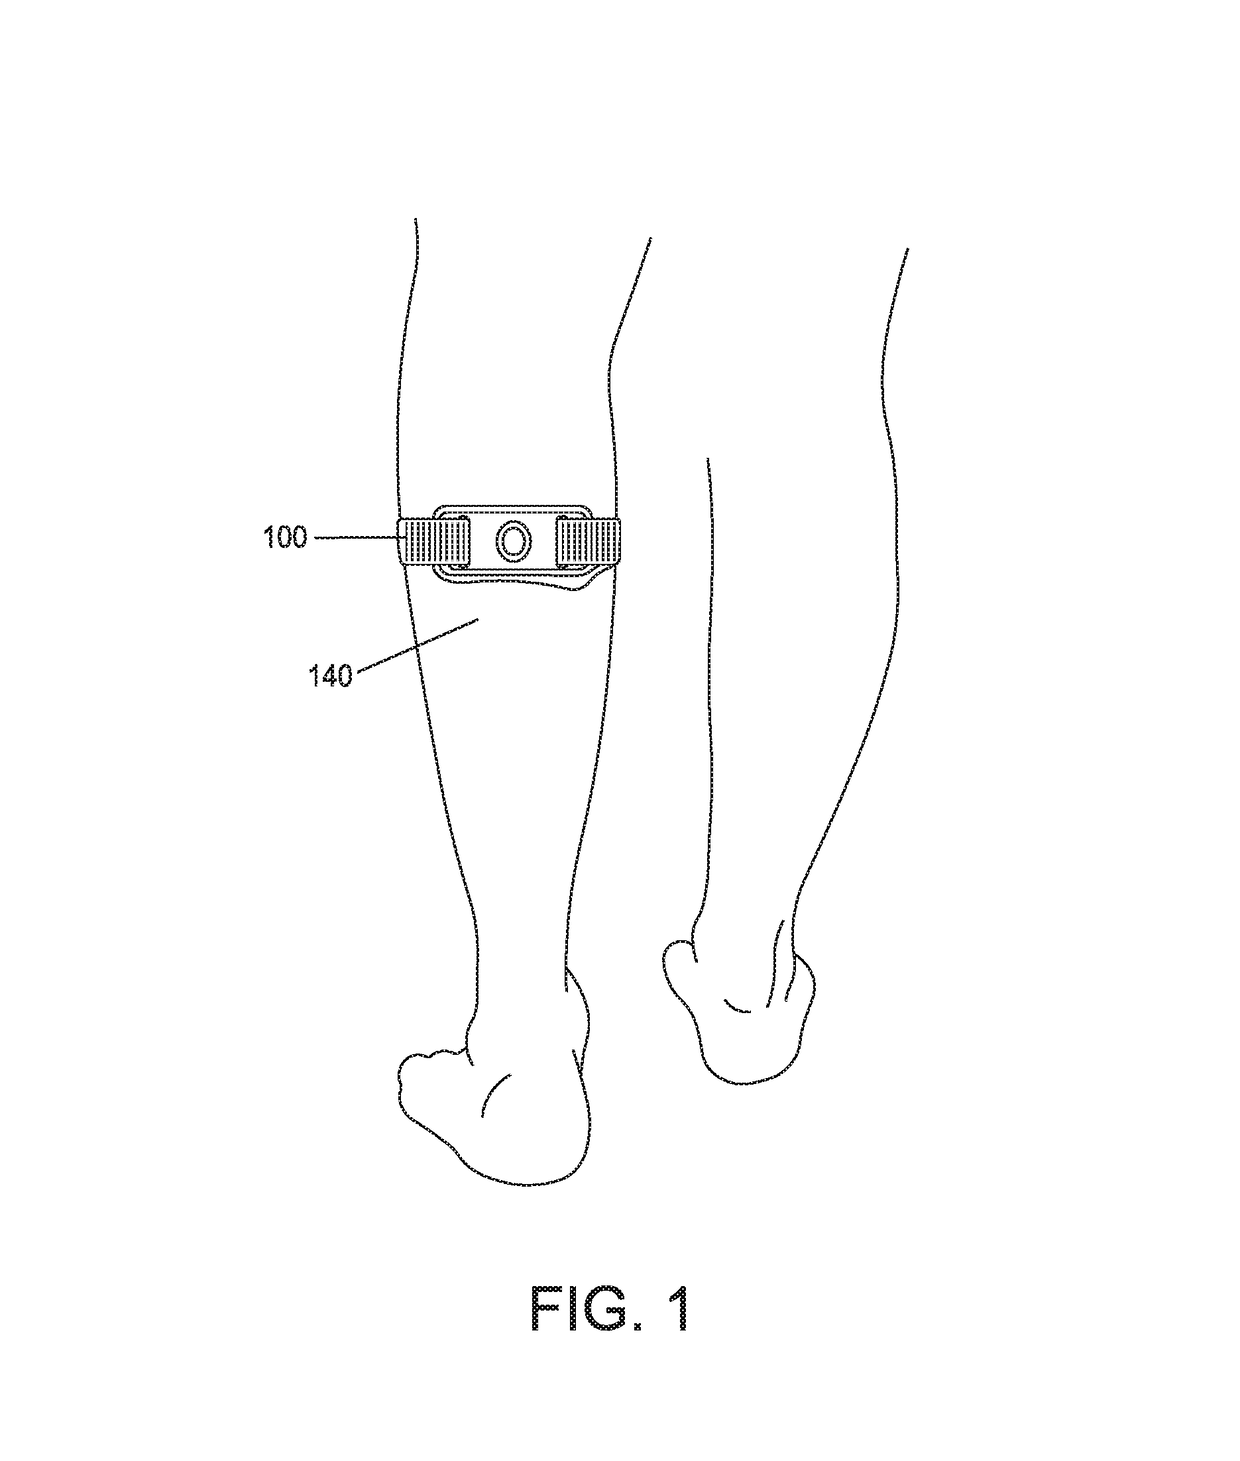 Measuring the “on-skin” time of a transcutaneous electrical nerve stimulator (TENS) device in order to minimize skin irritation due to excessive uninterrupted wearing of the same